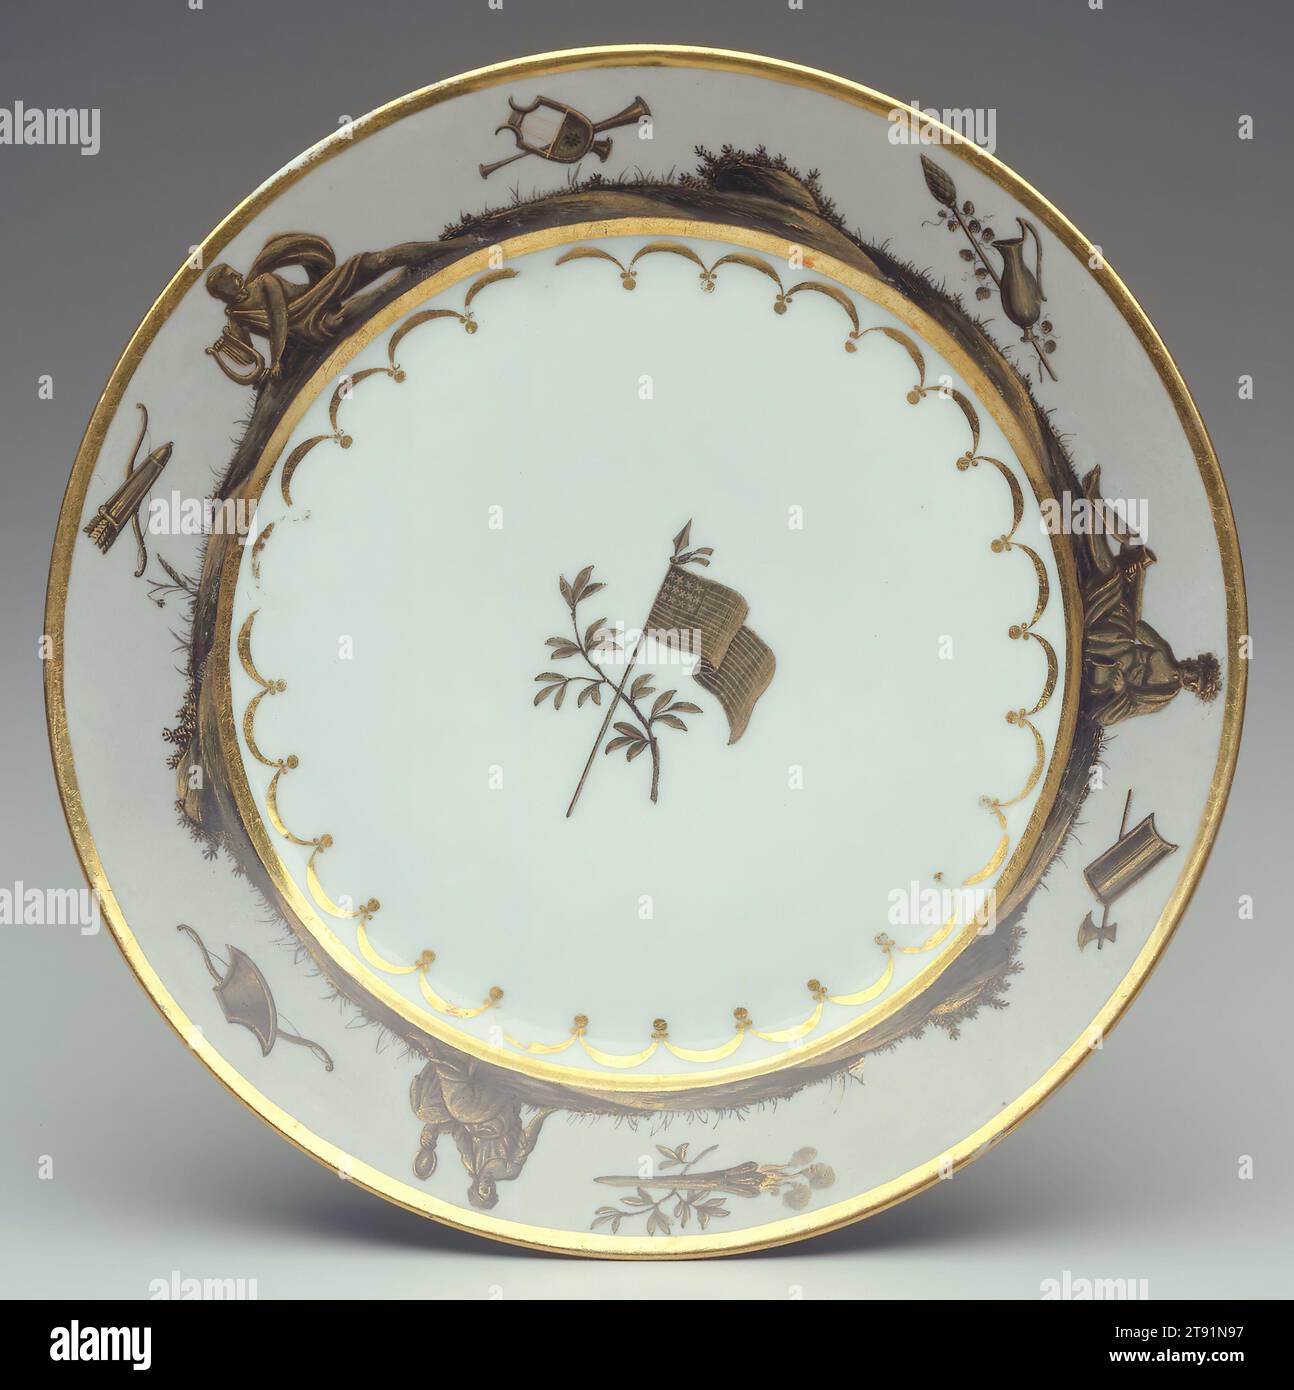 Plate, c. 1805, Guérhard et Dihl, Paris, 1 3/8 x 9 1/4 in. (3.49 x 23.5 cm), Porcelain, France, 19th century, Rather than adorn their dinner services with heraldic crests like the aristocracies of Europe, Americans preferred nationalistic imagery. While encouraging the French to support America's fight for independence, Benjamin Franklin promised them that the new nation would be an ideal market for luxury goods from France. The French monarchy obliged, and manufacturers in France eagerly produced ceramics, glassware, and other decorative arts combining the American symbols Stock Photo